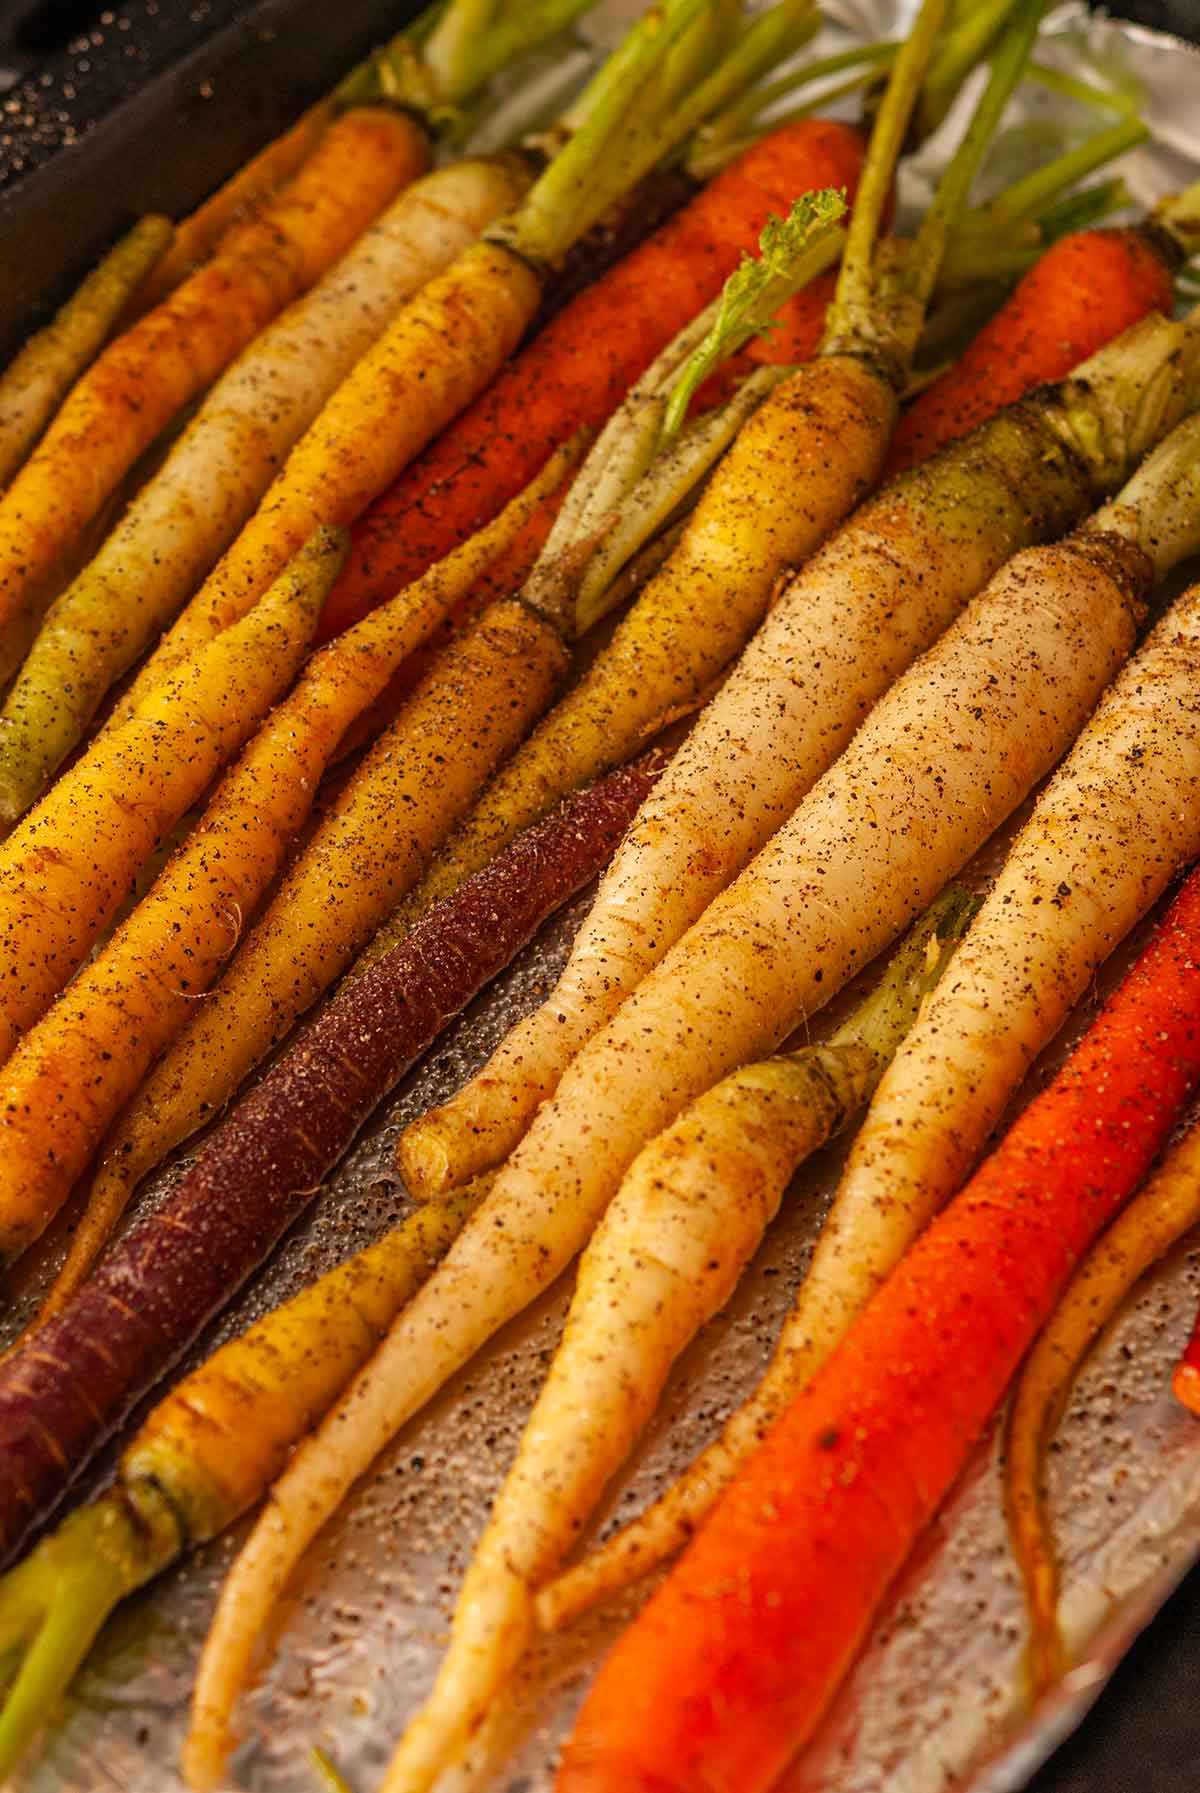 Rainbow carrots on a foil-lined baking sheet, sprinkled with salt and pepper.